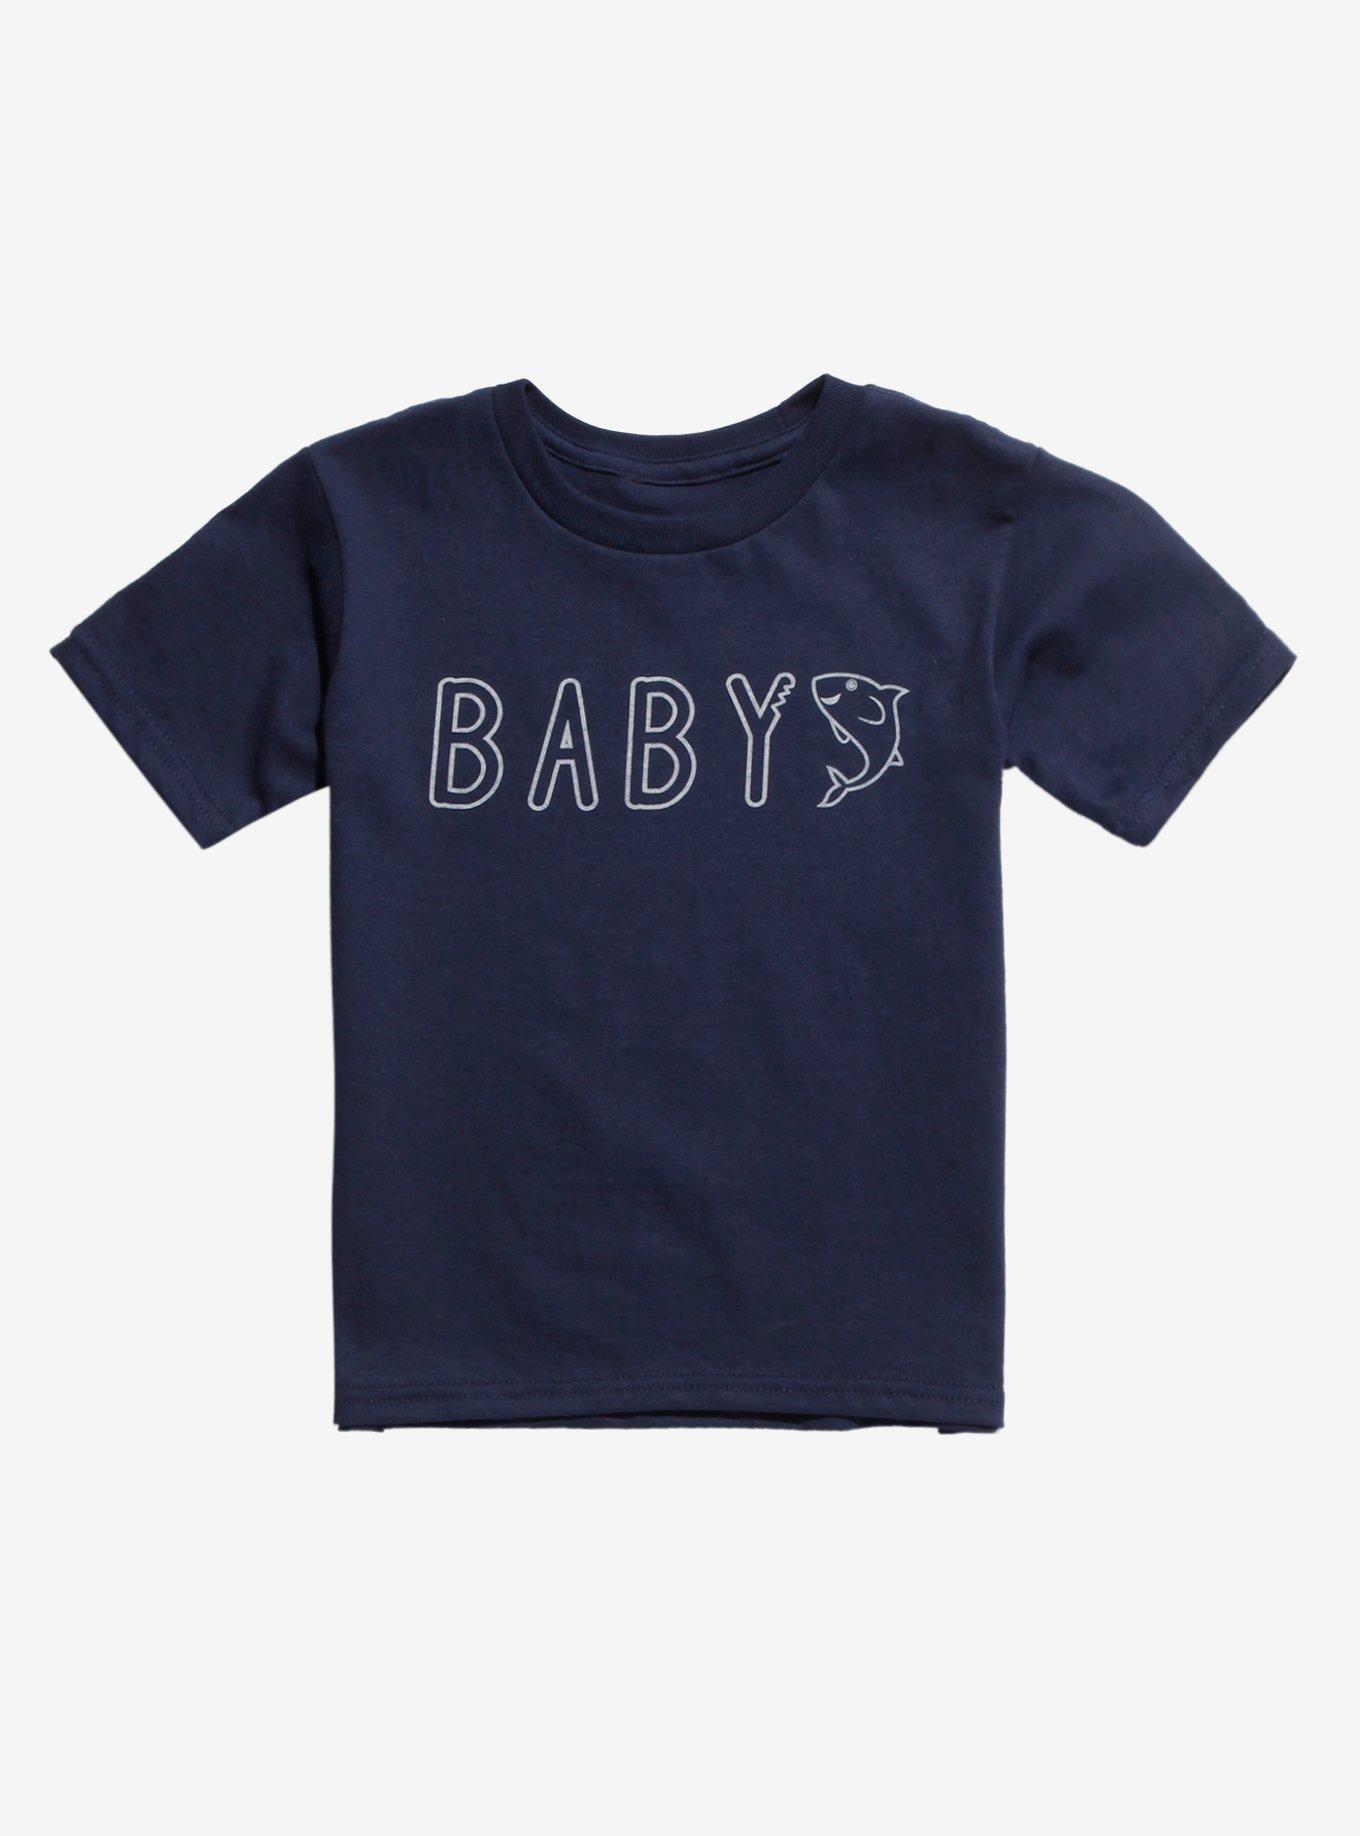 Baby Shark Toddler T-Shirt - BoxLunch Exclusive | BoxLunch